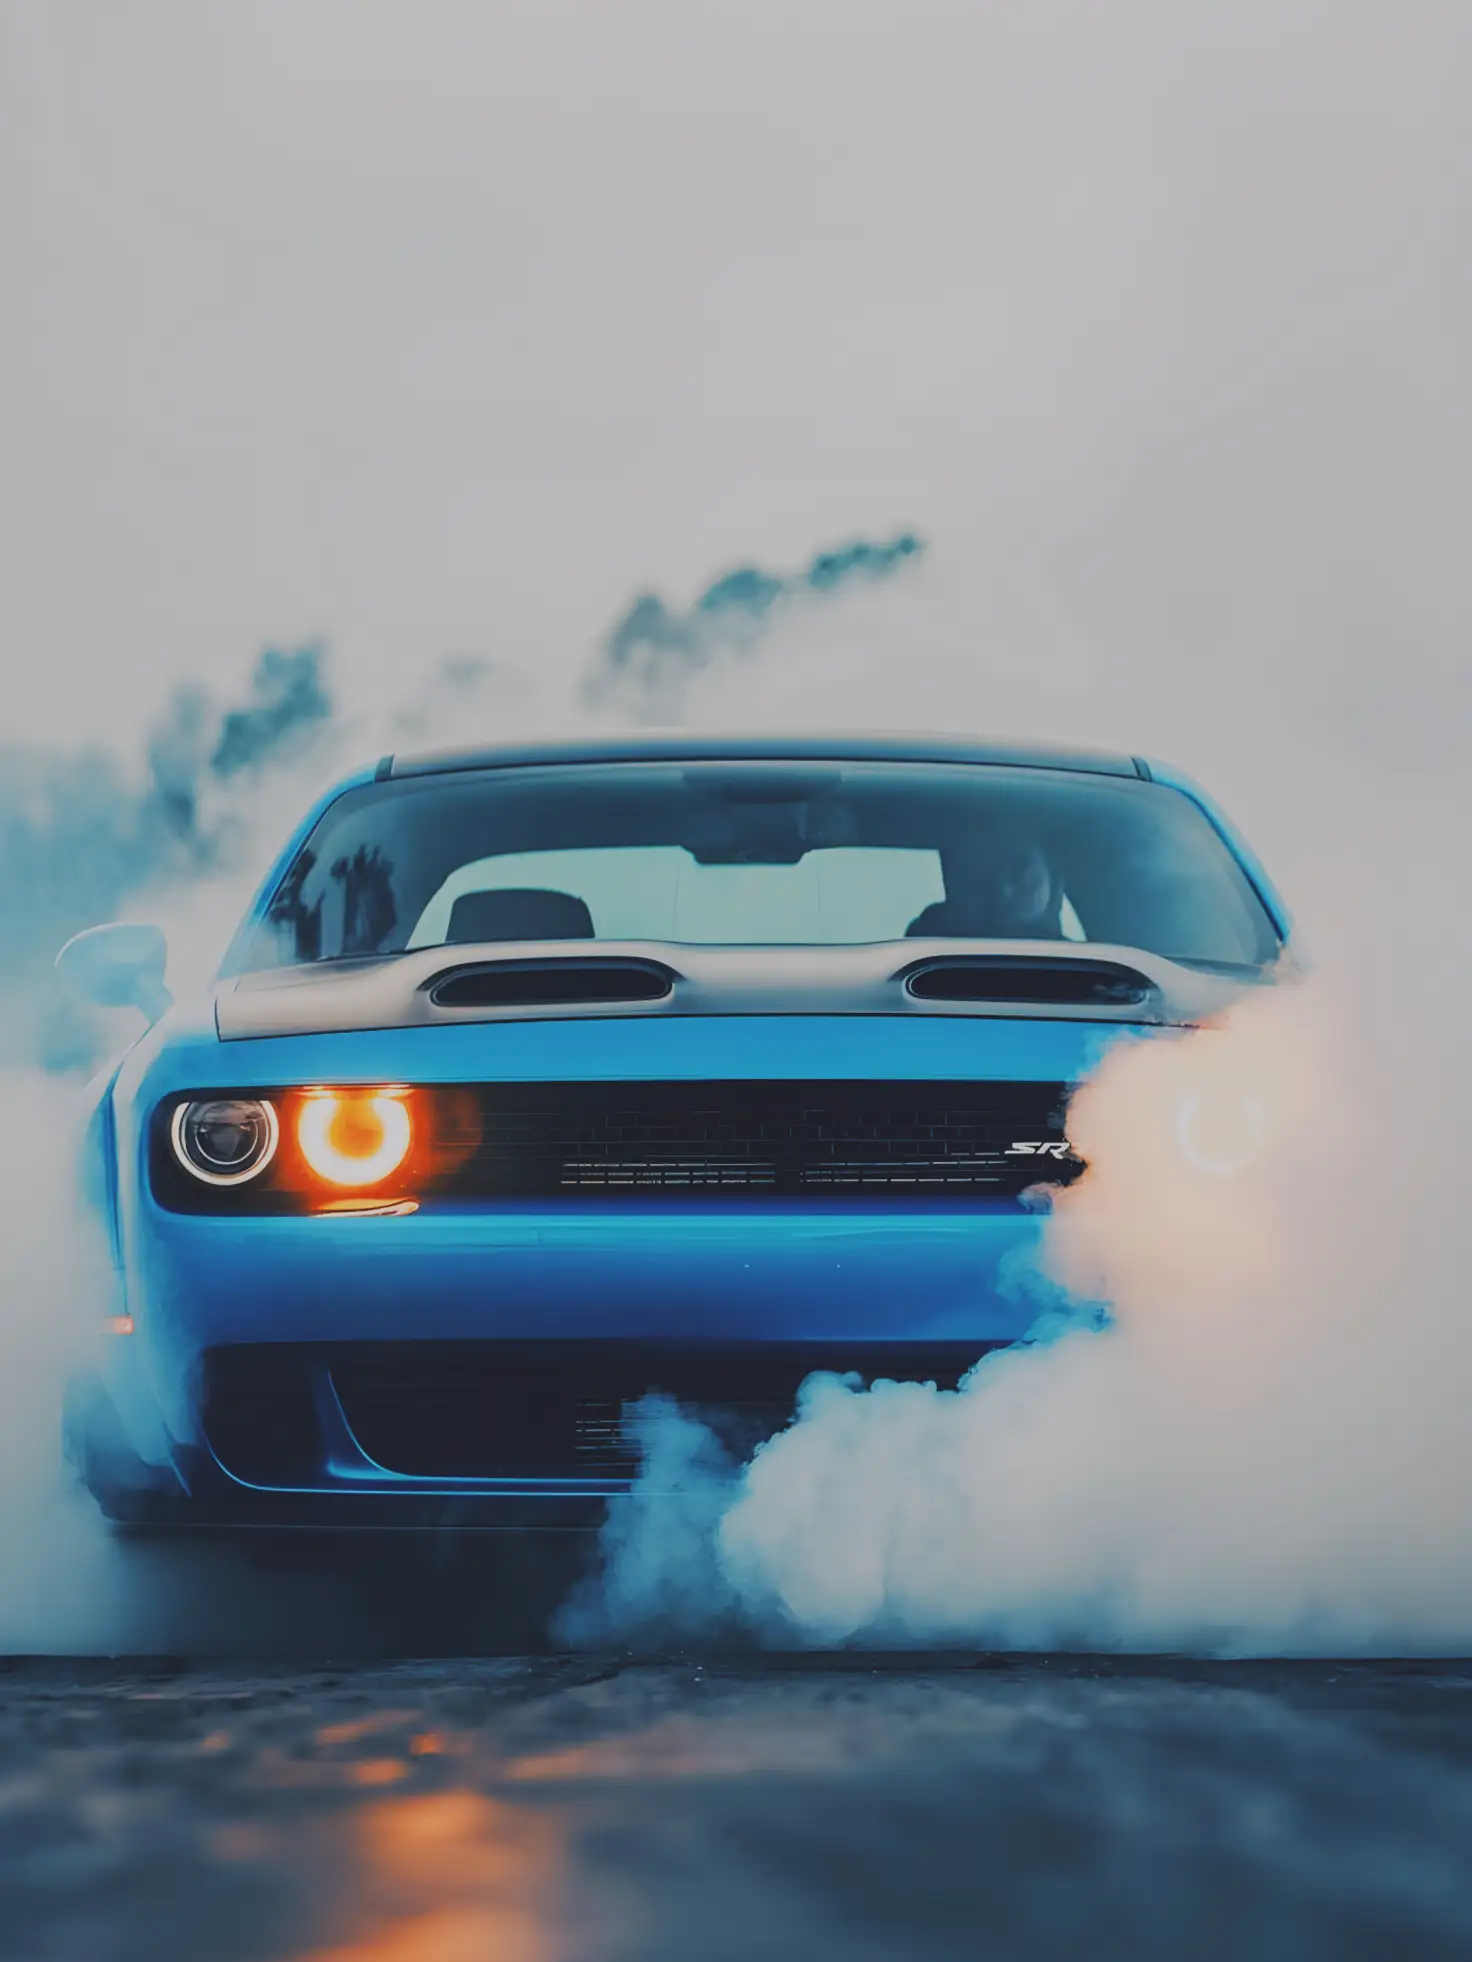 You are currently viewing Car with smoke editing background download